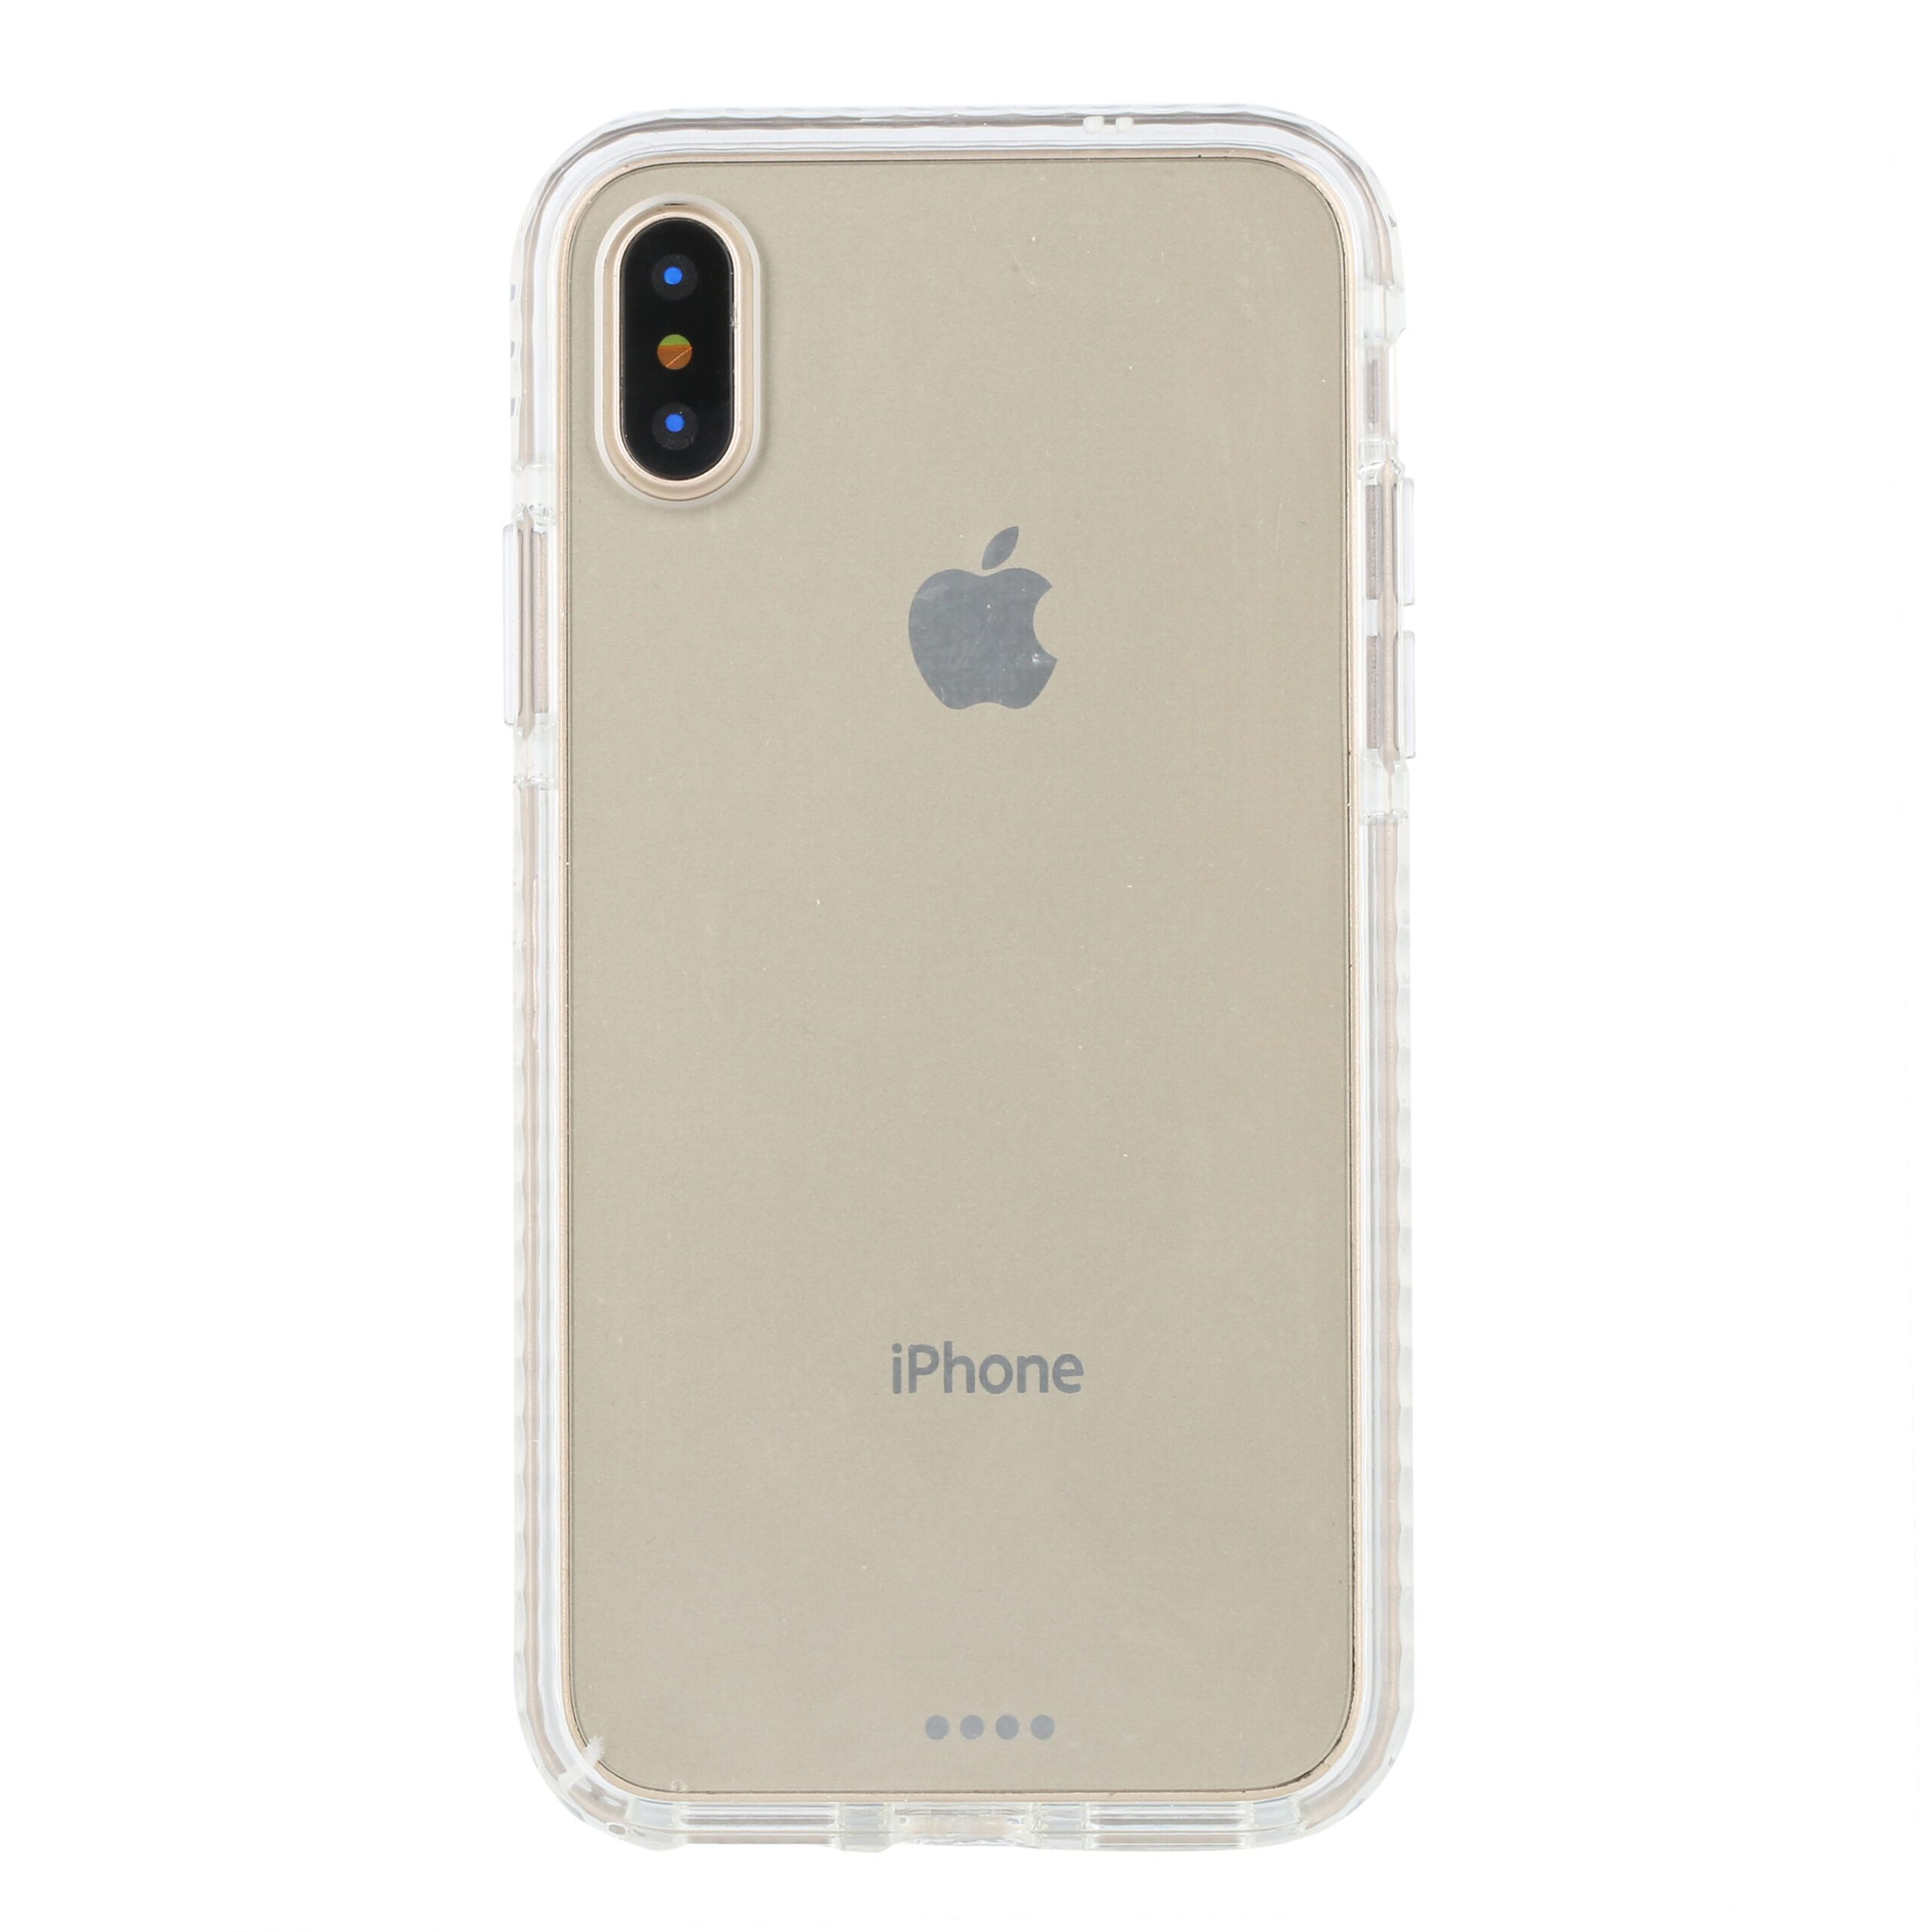 Clear case protector for iPhone X cell phones